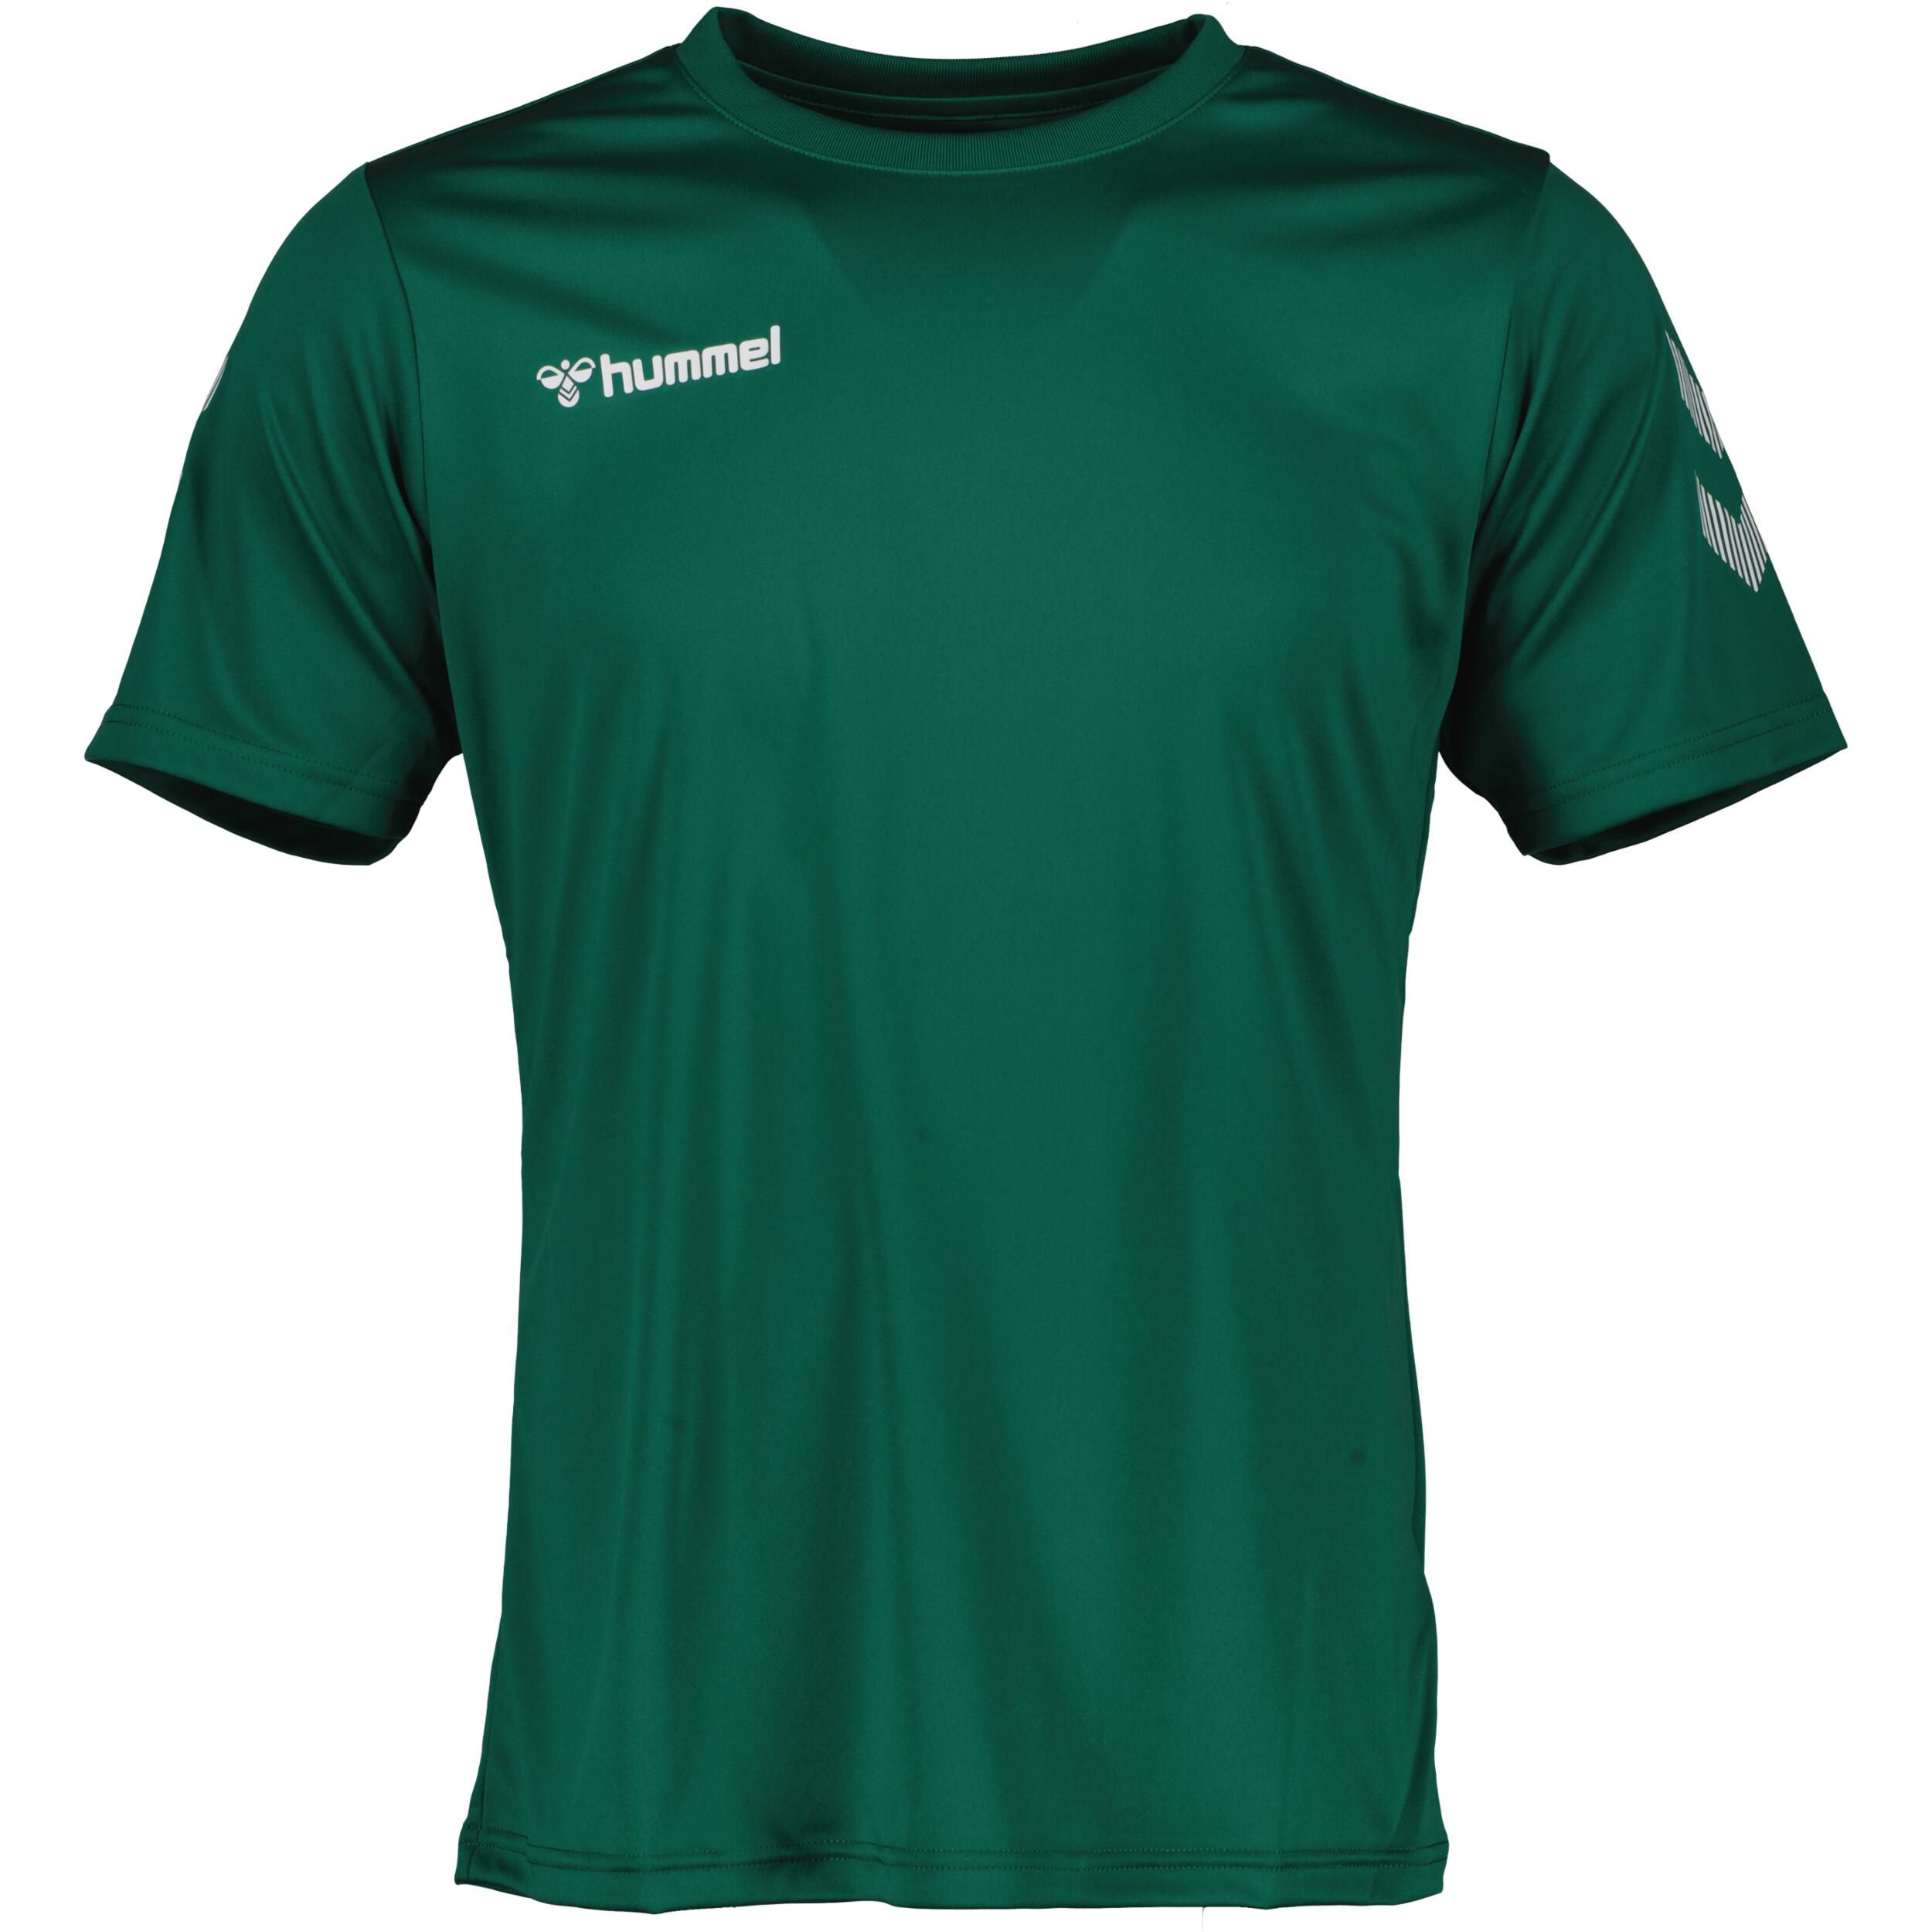 HUMMEL Solo jersey for men, great for football, in evergreen